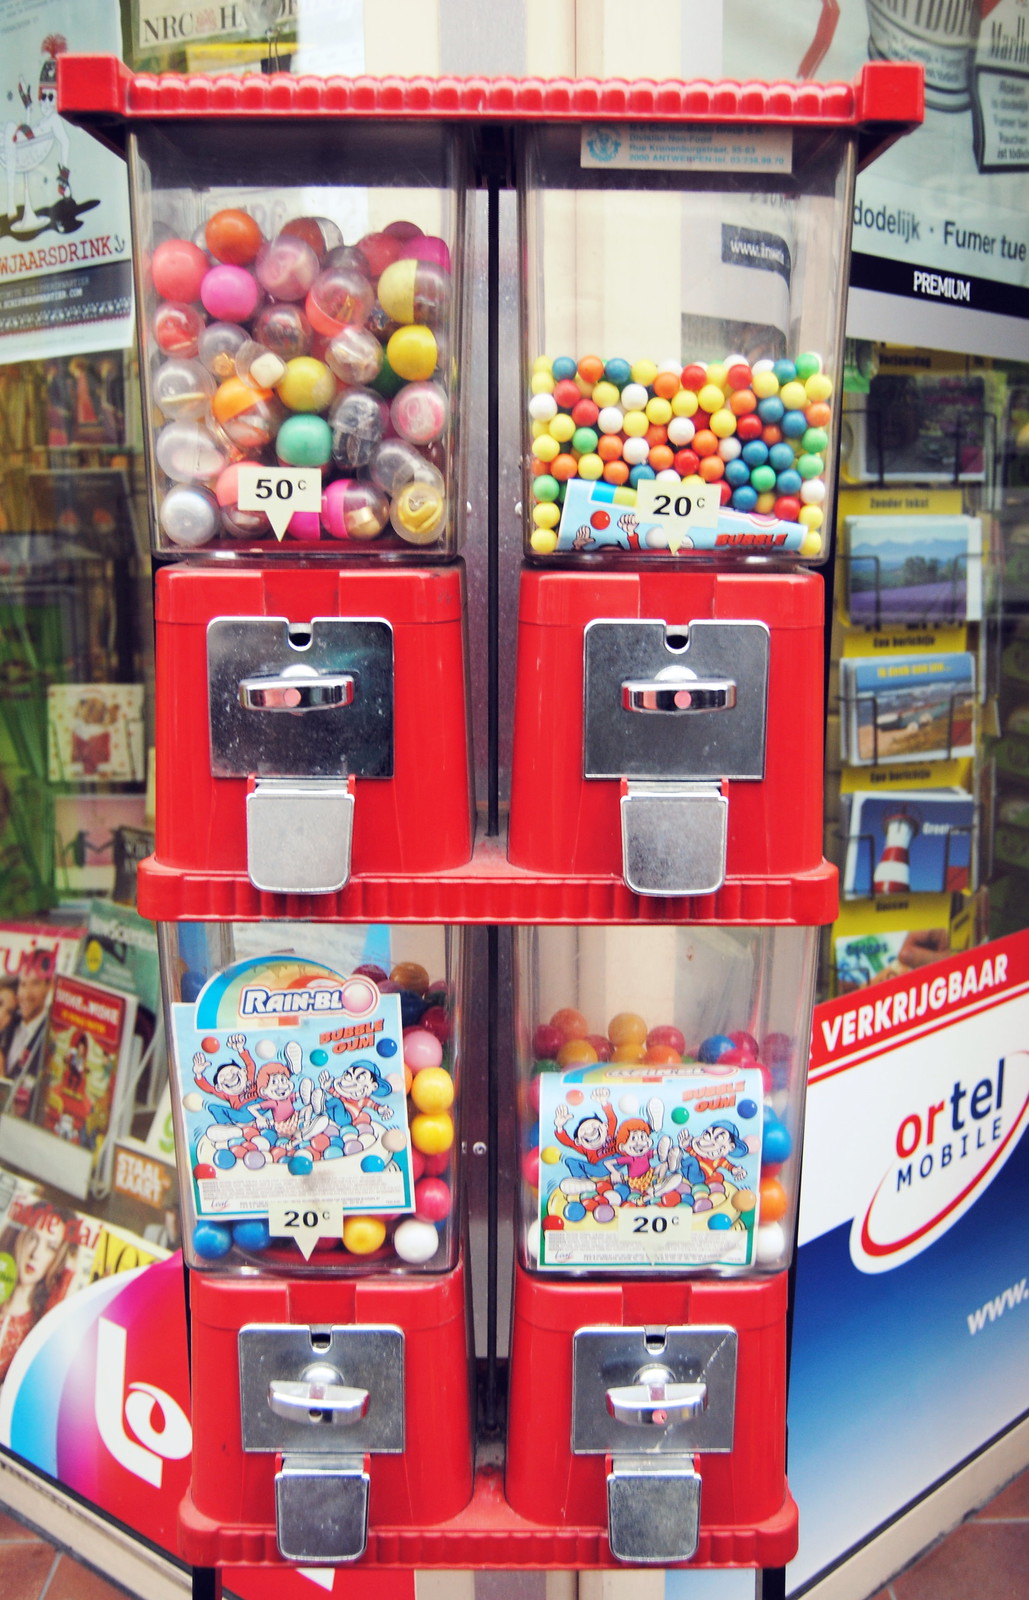 A red candy machine in Antwerp.